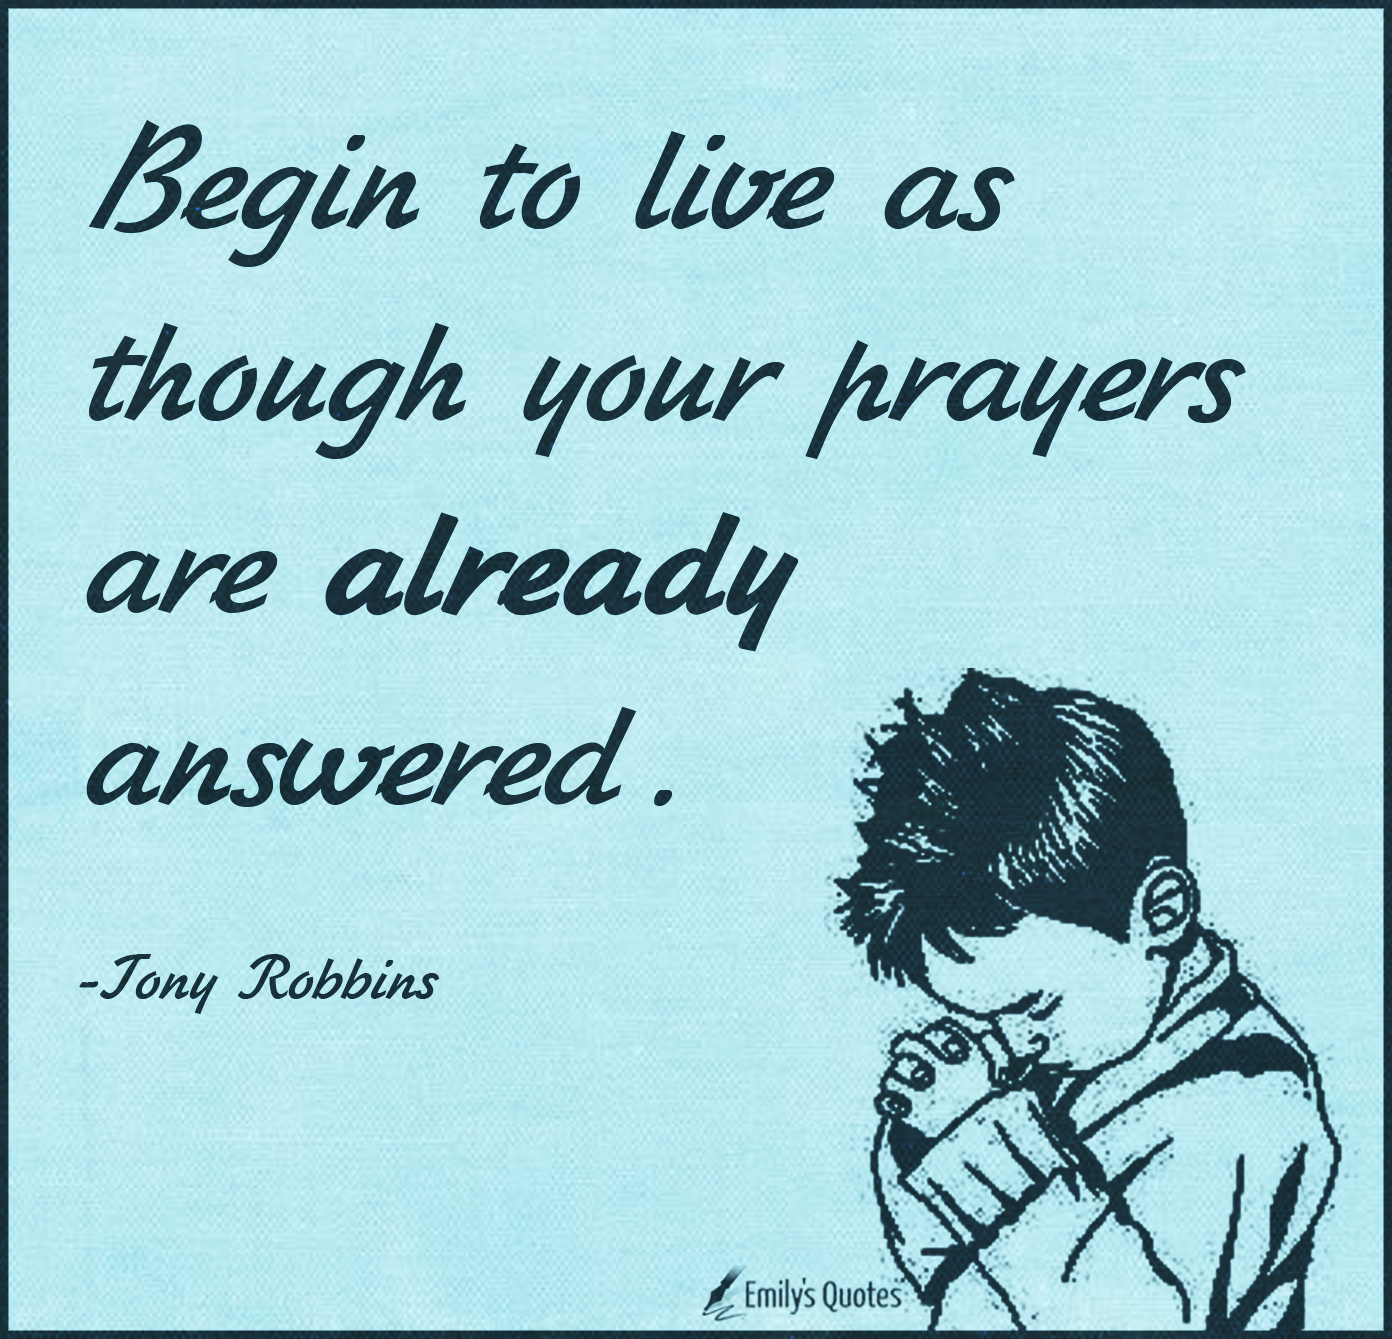 Begin to live as though your prayers are already answered